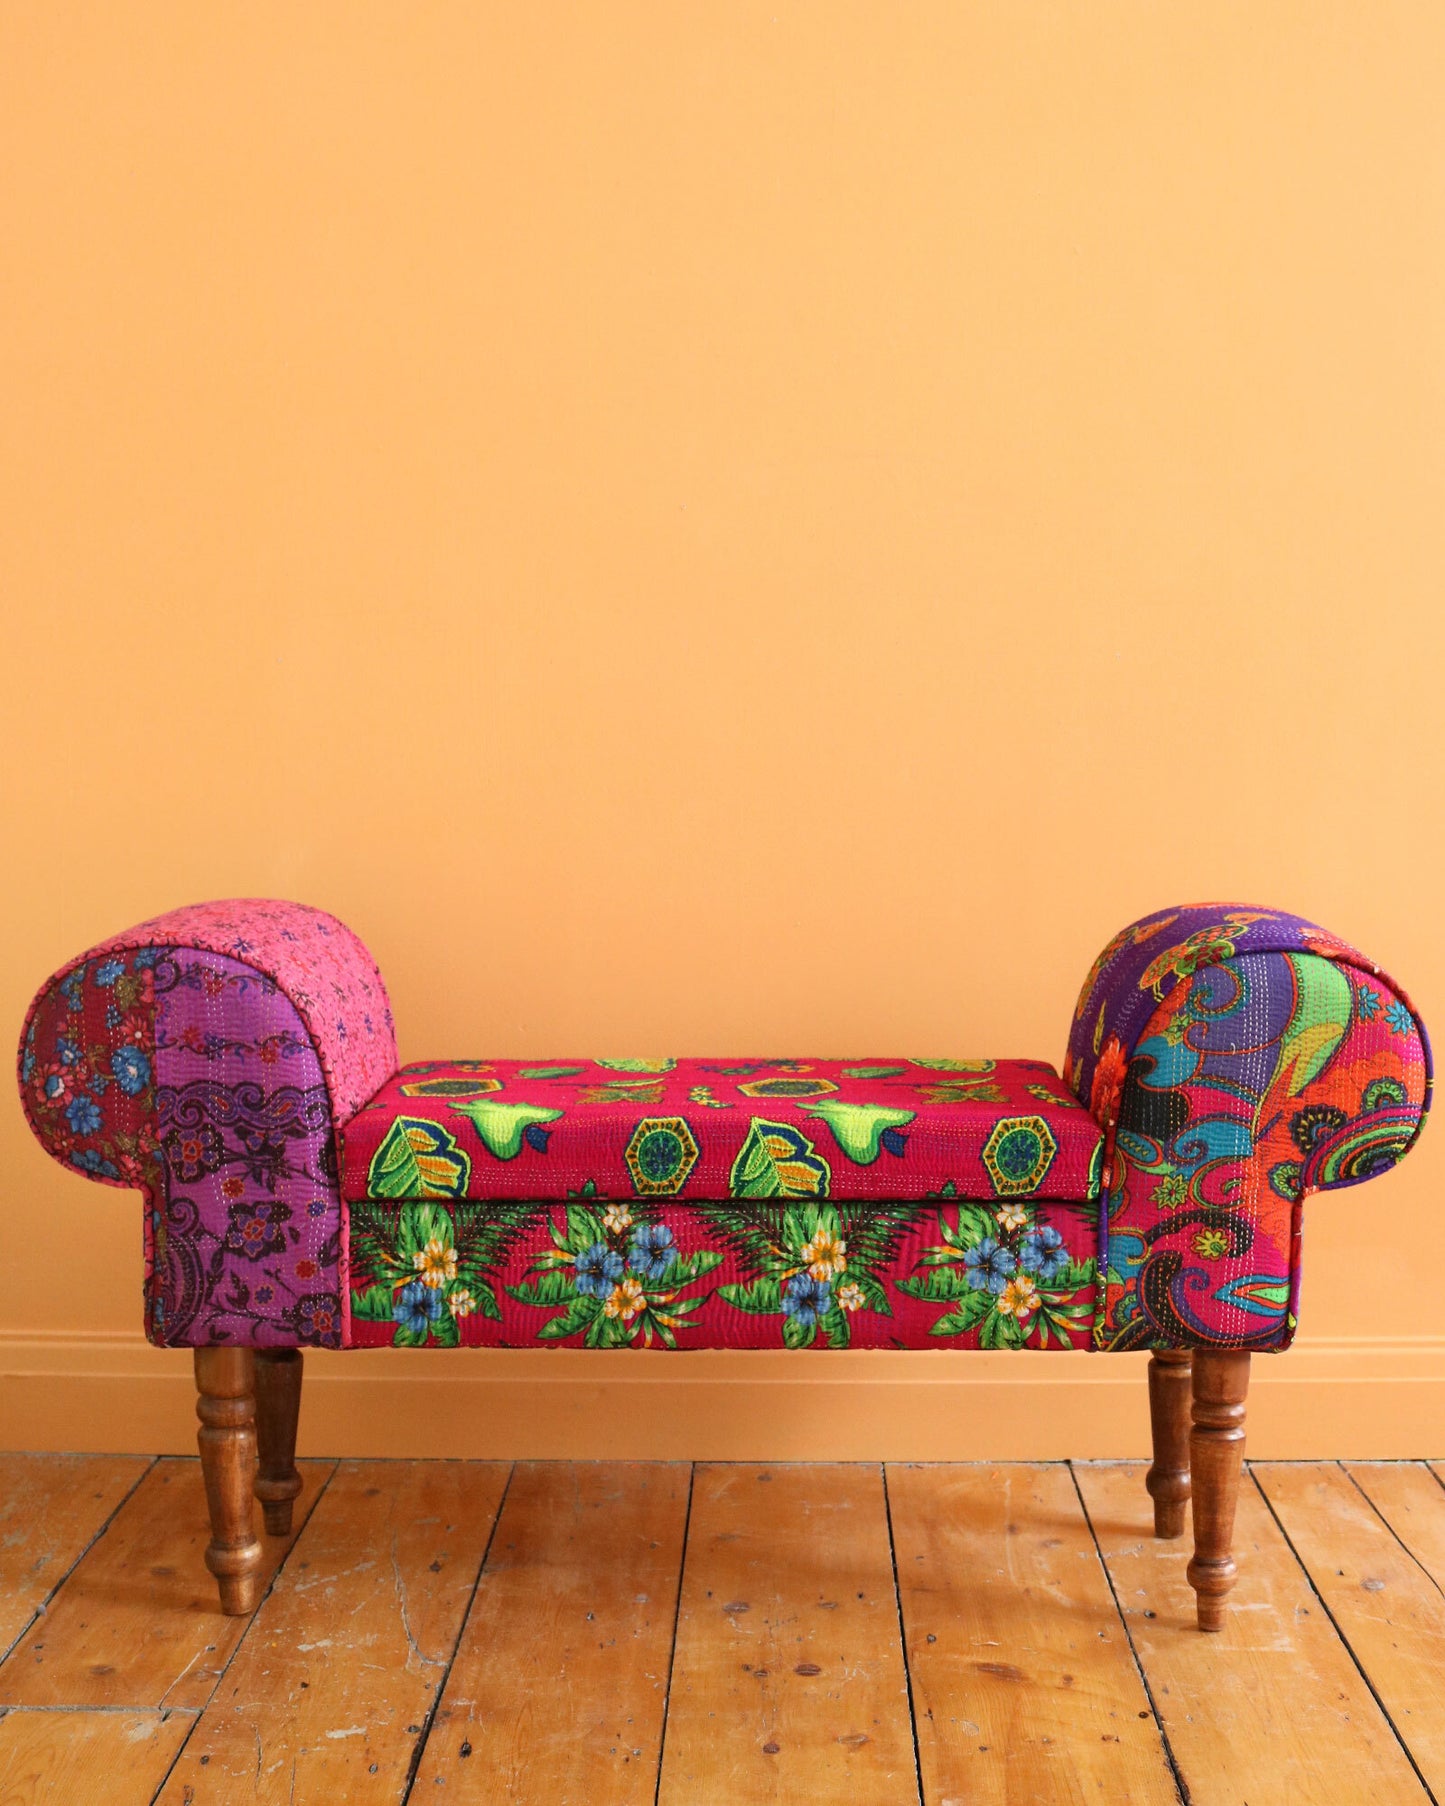 Hand-Stitched Vintage Scroll Bench with Storage, No. 3